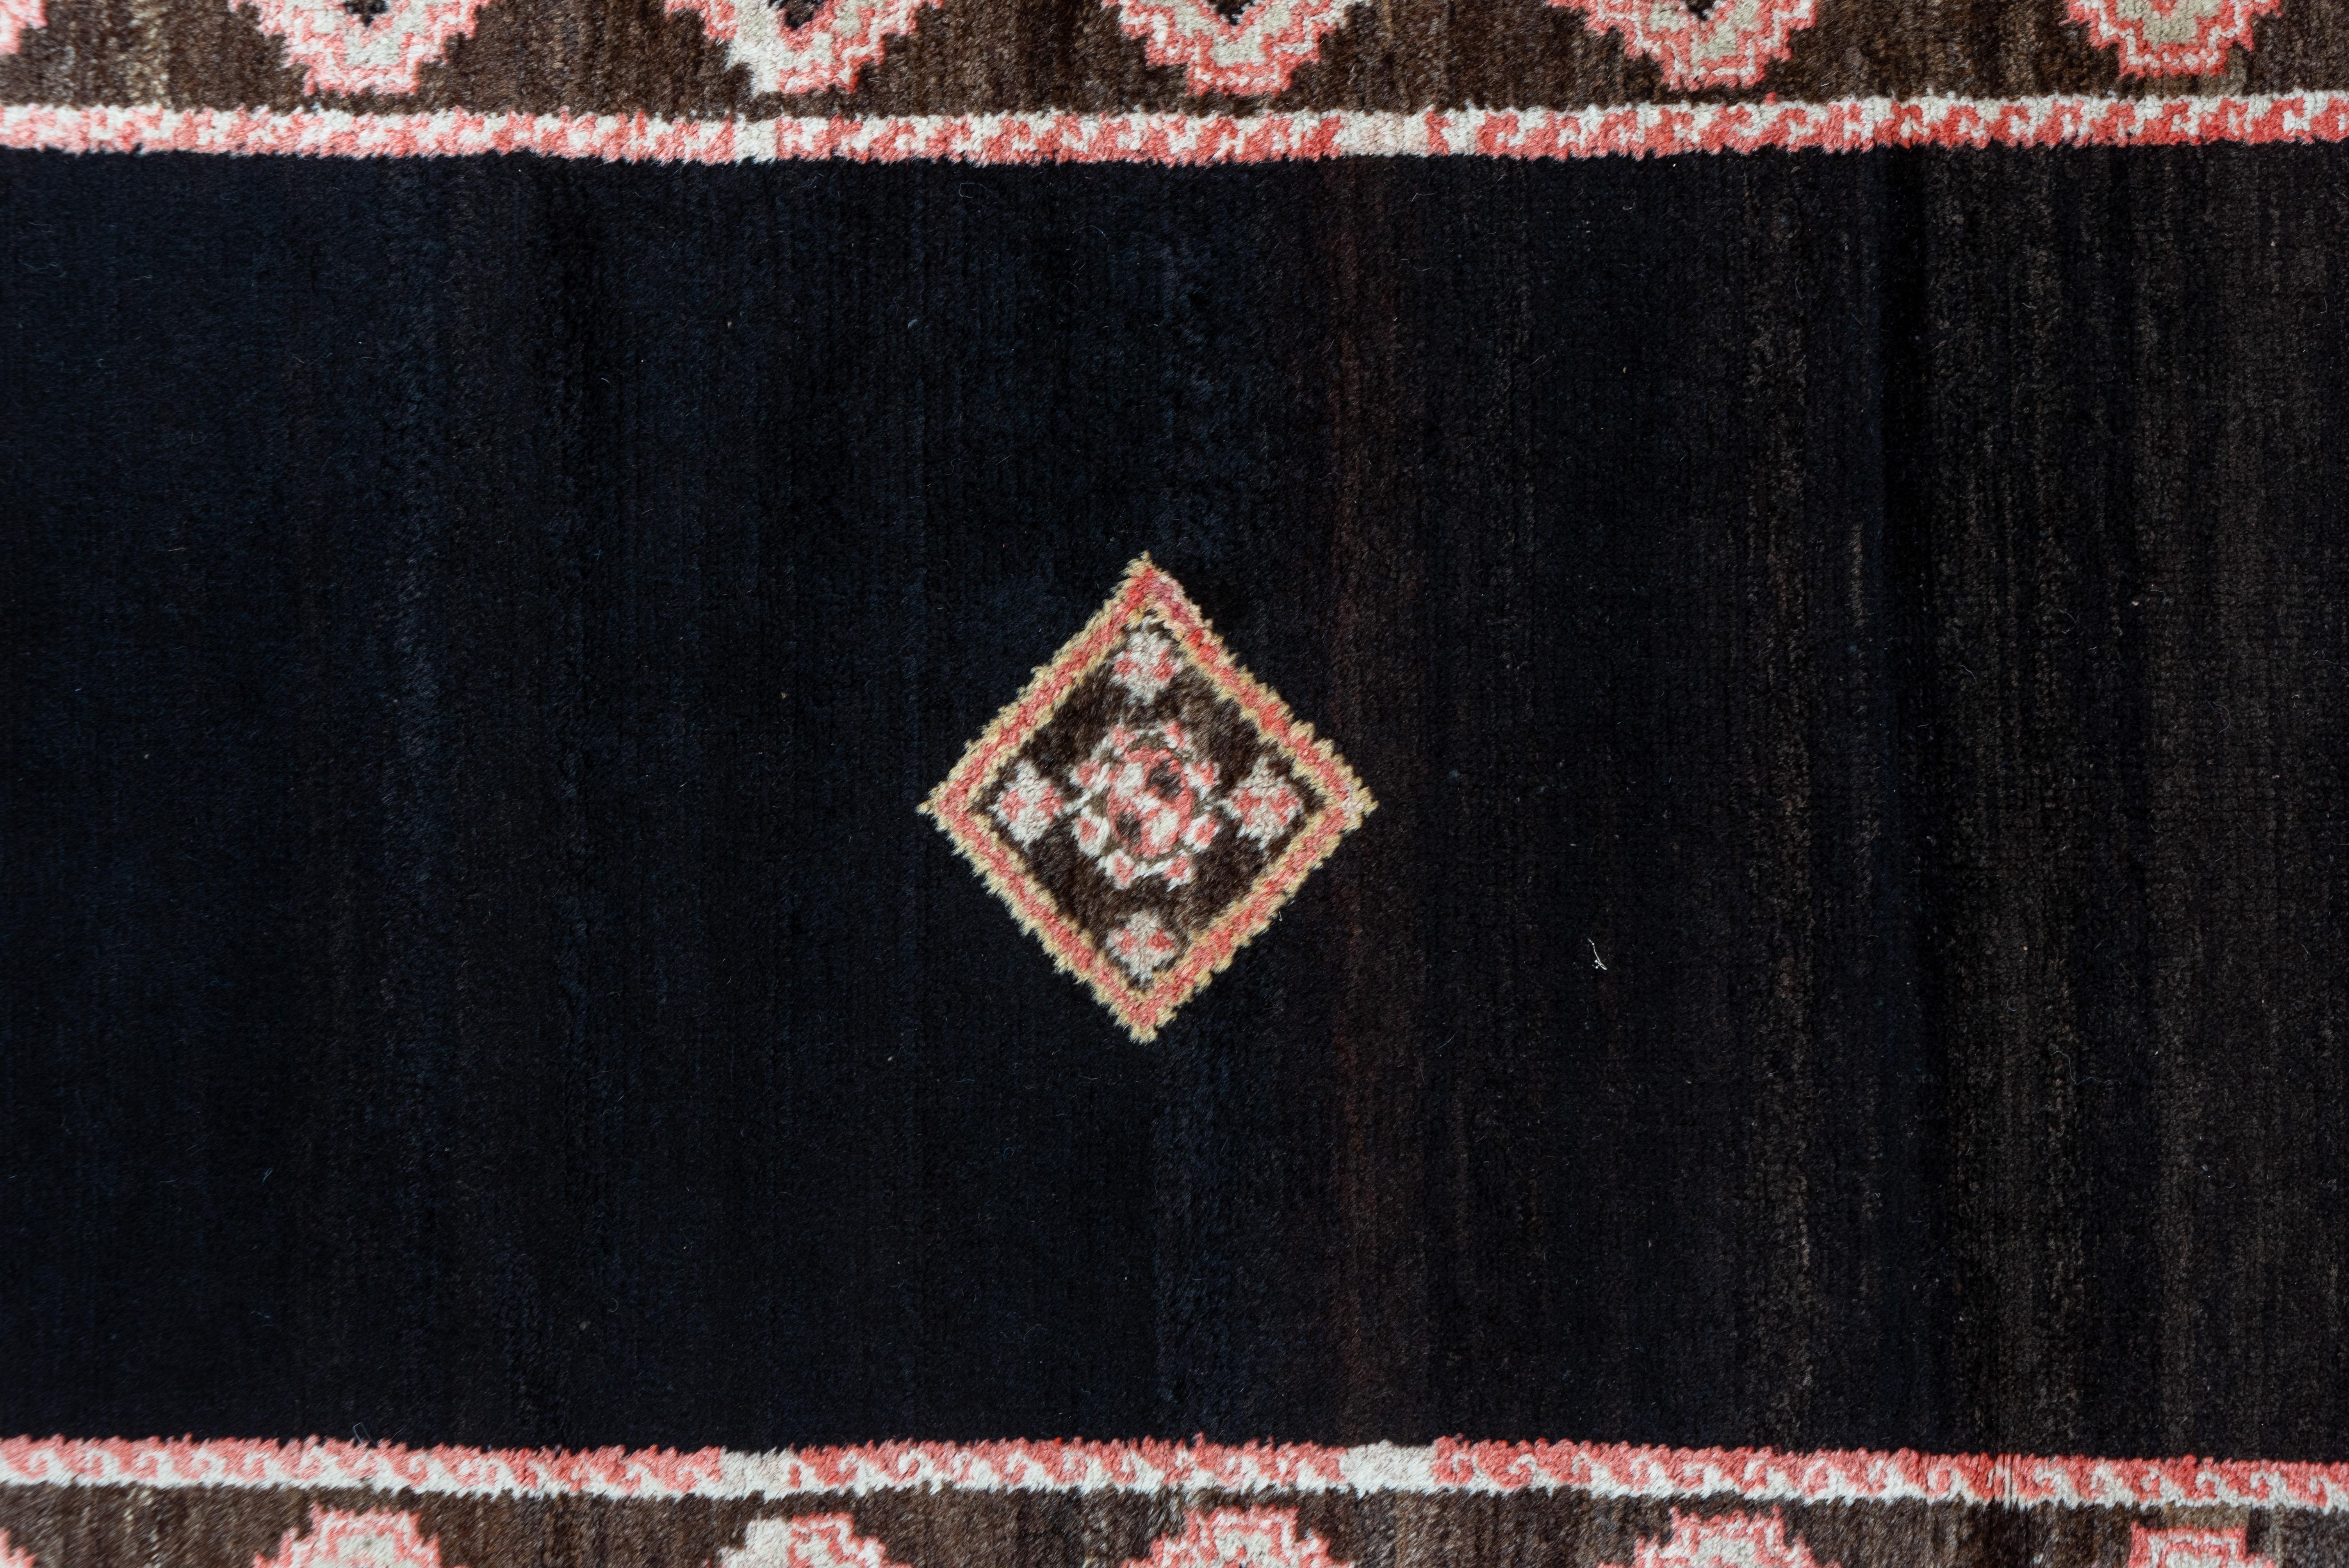 Mid-20th Century Antique Rustic Persian Hamadan Rug, Chocolate Brown Field, Pink Accents For Sale